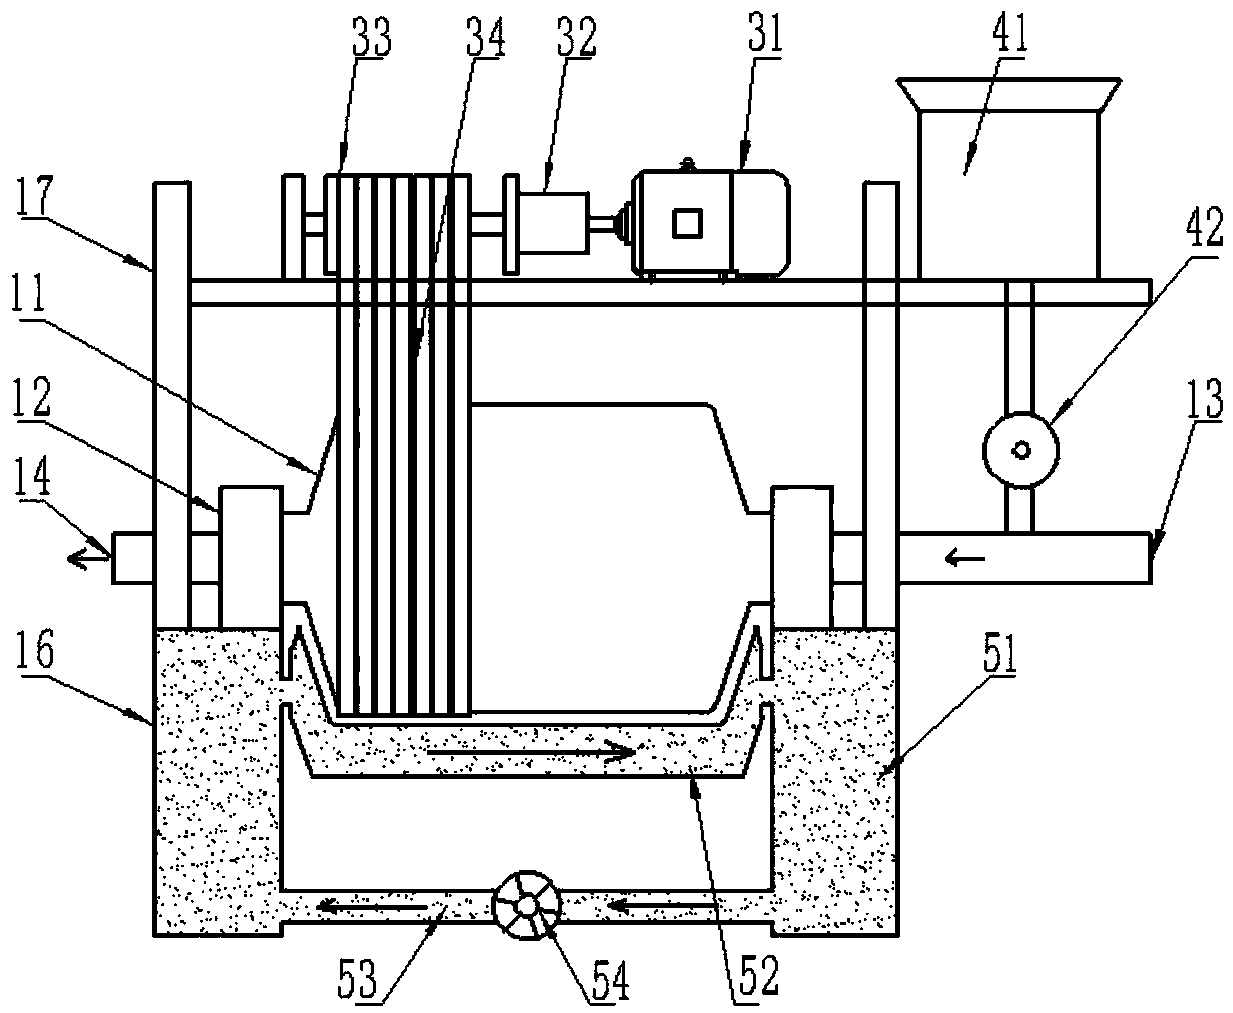 Slurry grinding and conveying system